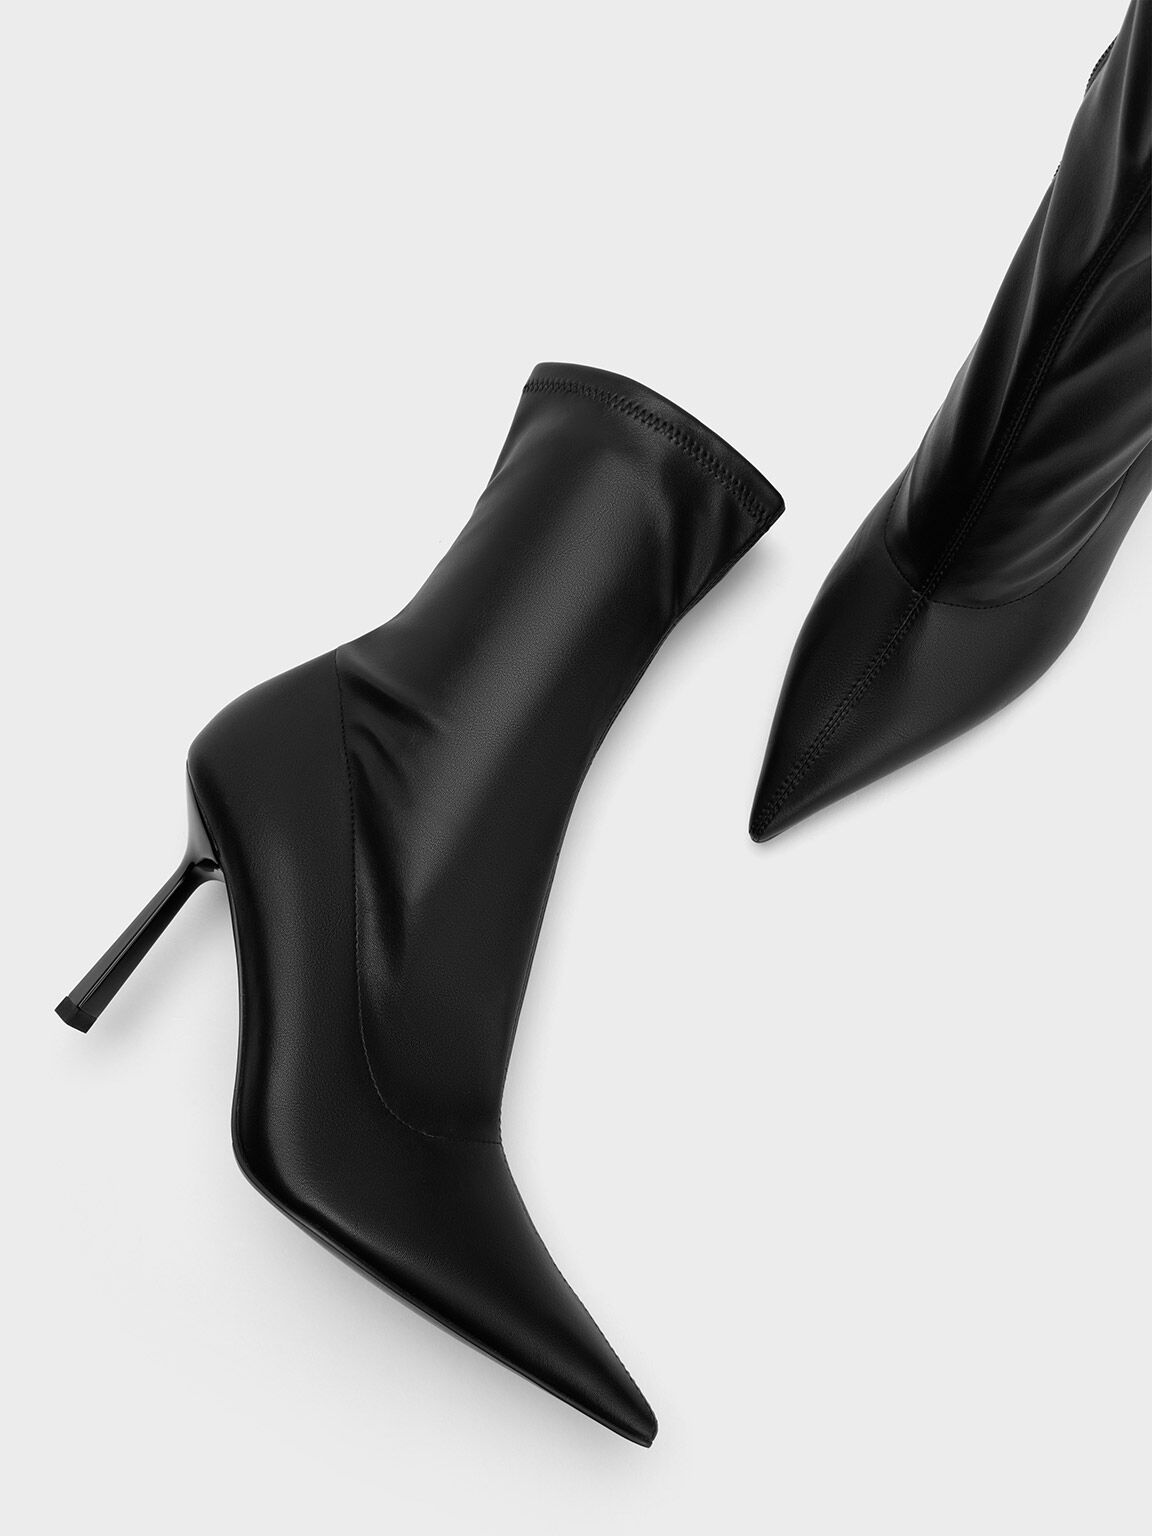 Pointed-Toe Stiletto Heel Ankle Boots - Black